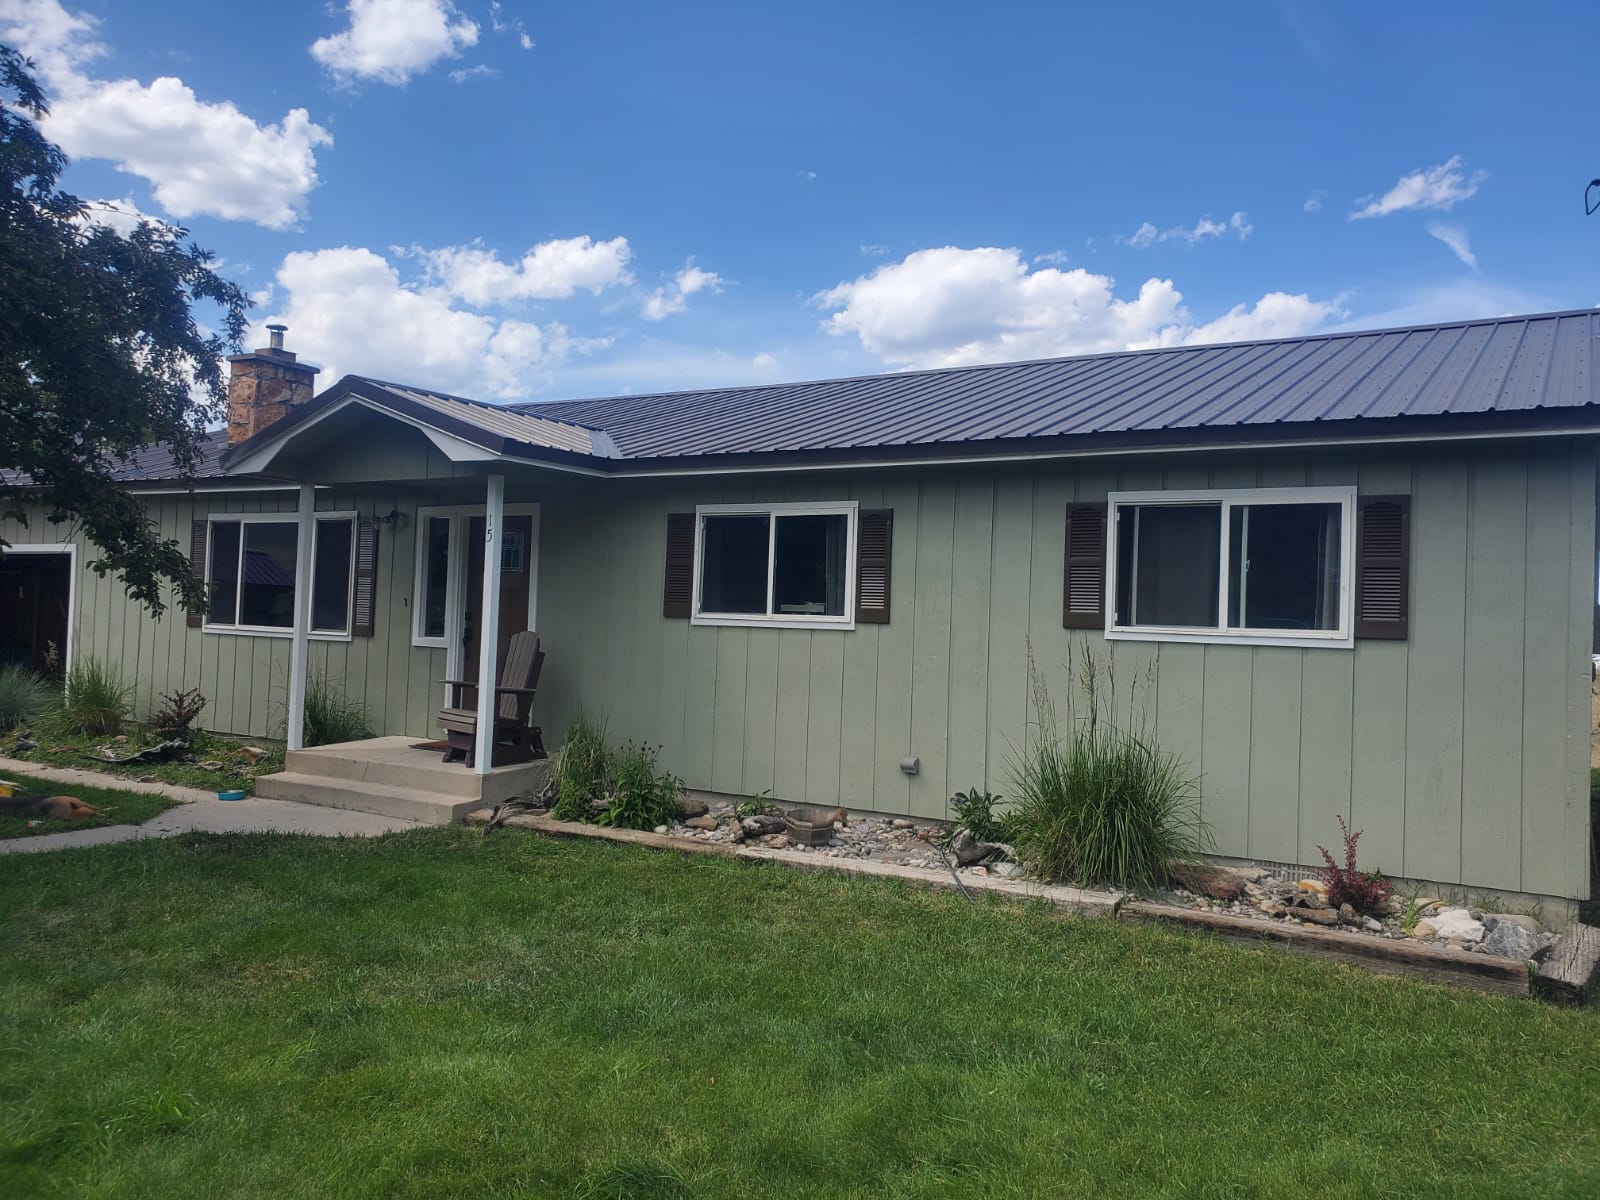 Painting the Paradise and Construction 911 Shoup St, Salmon Idaho 83467